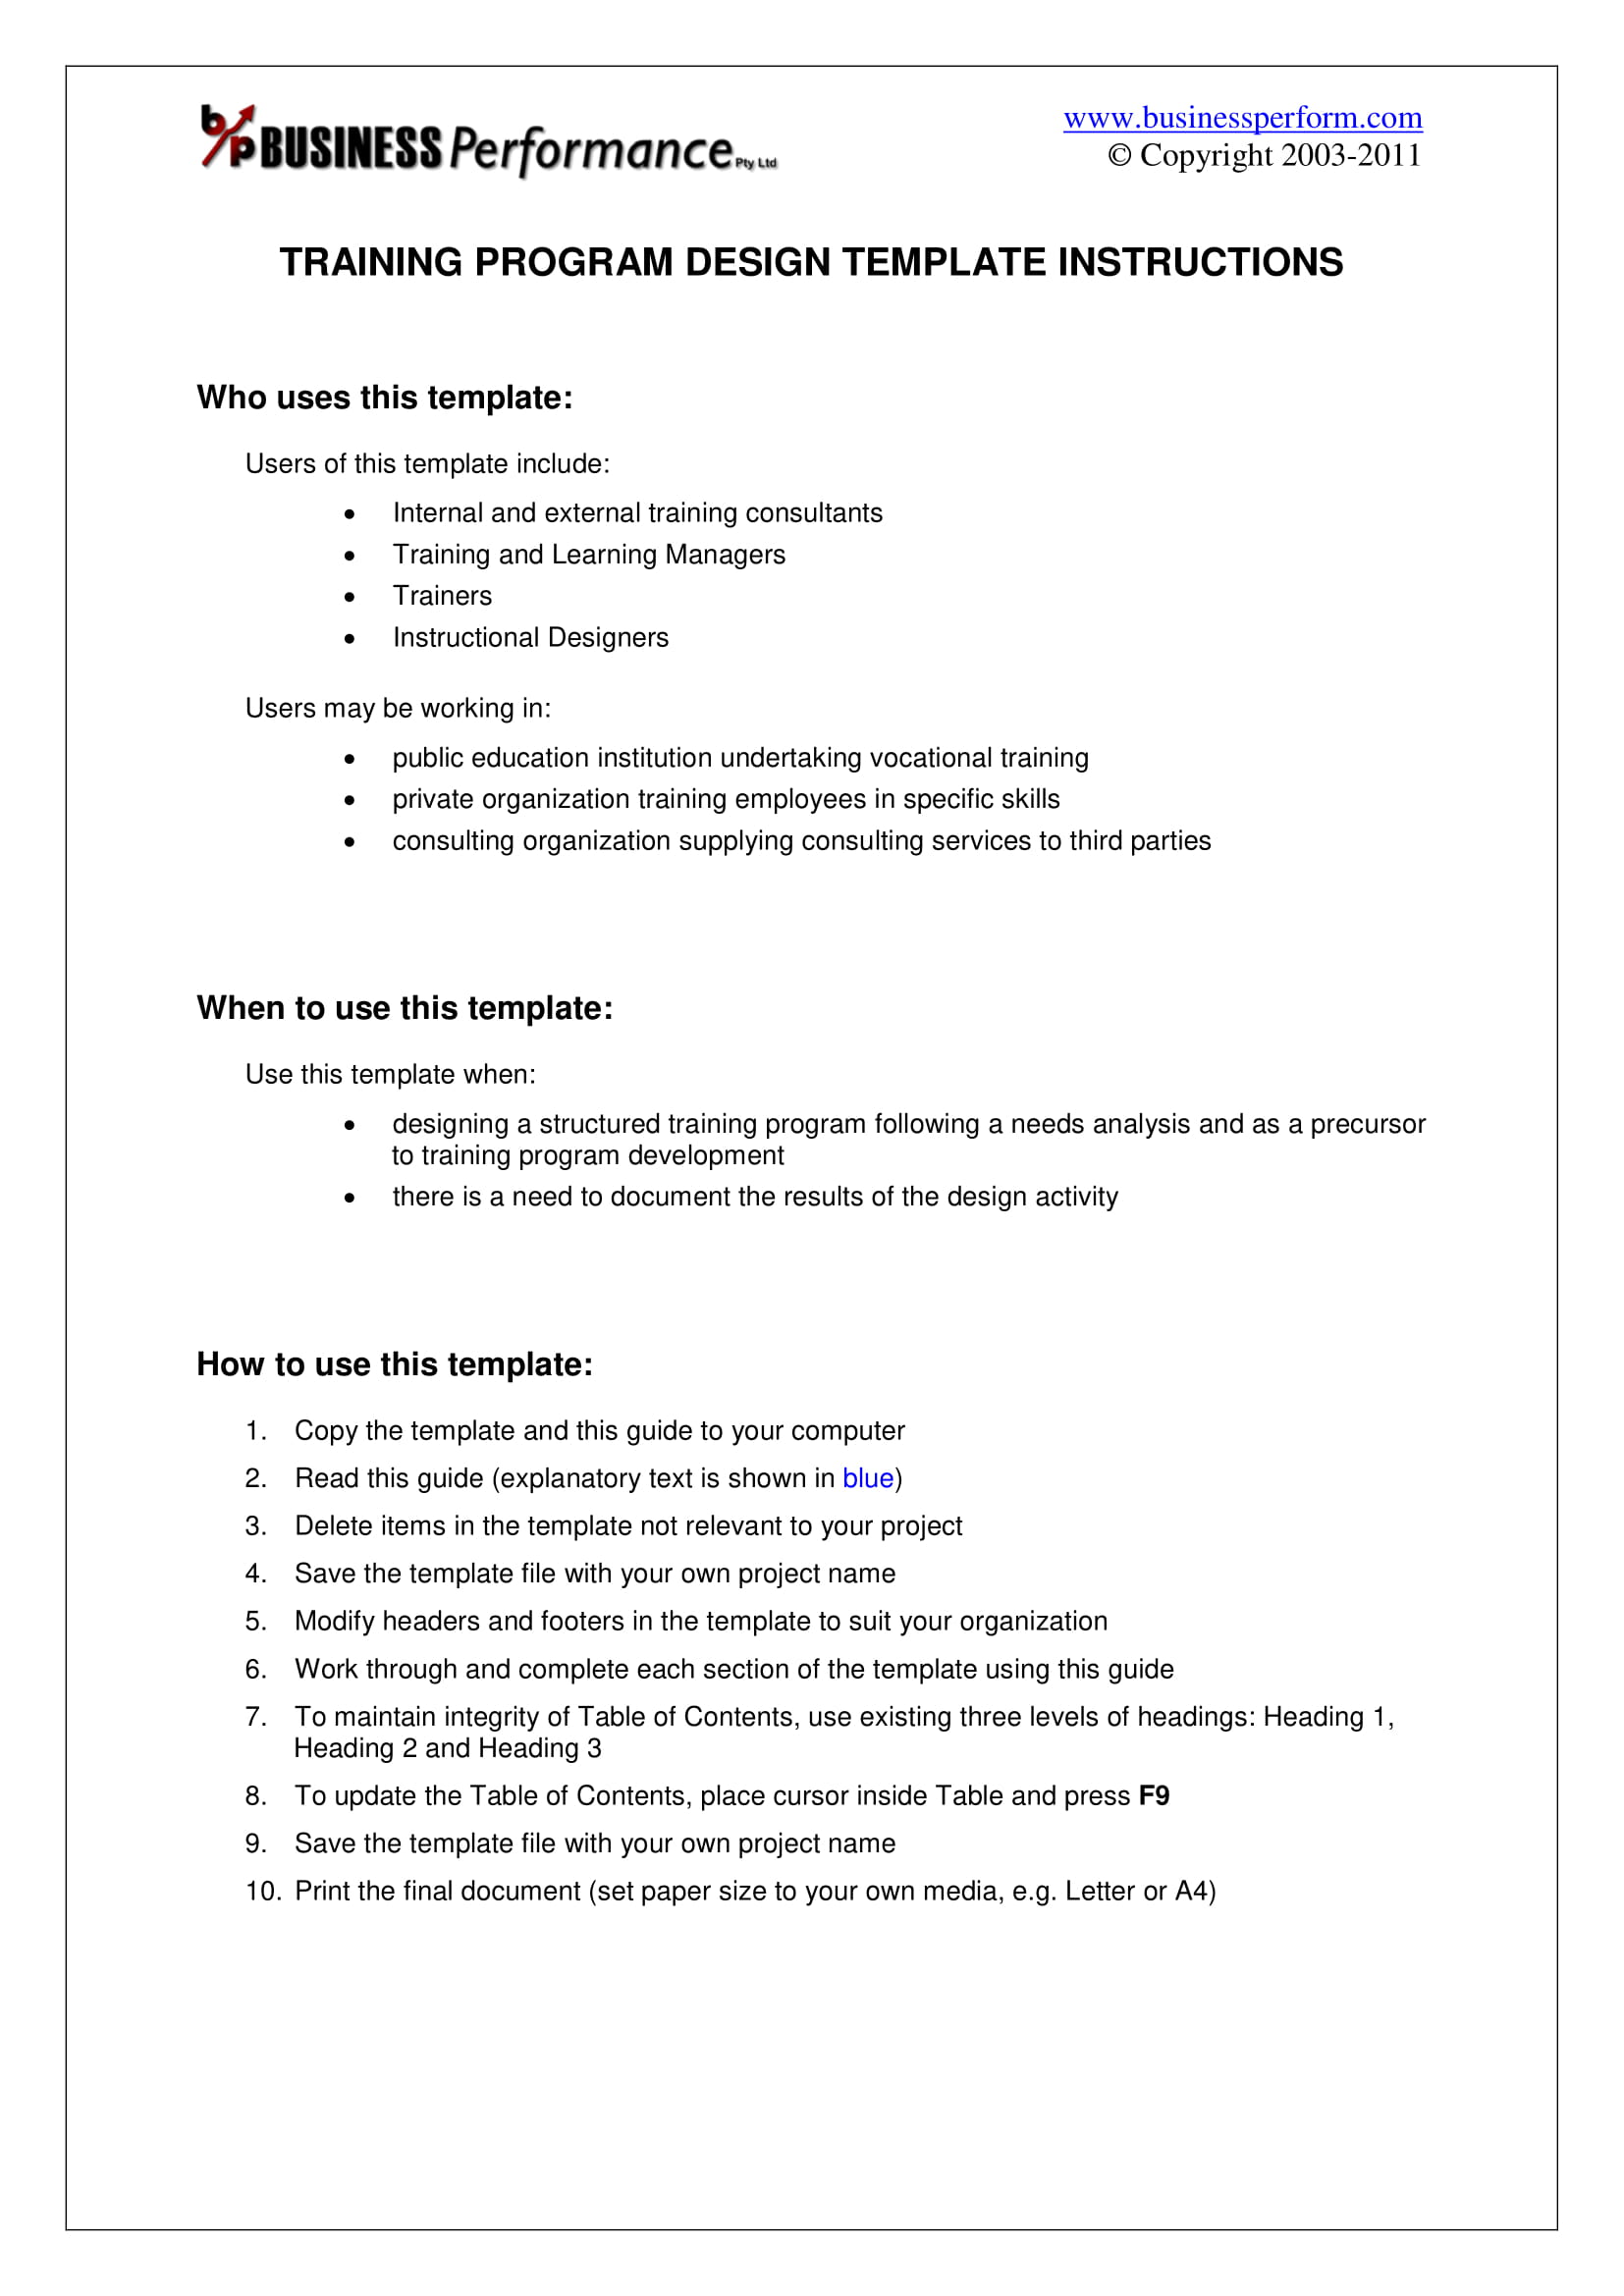 training program plan design template for a project example 01